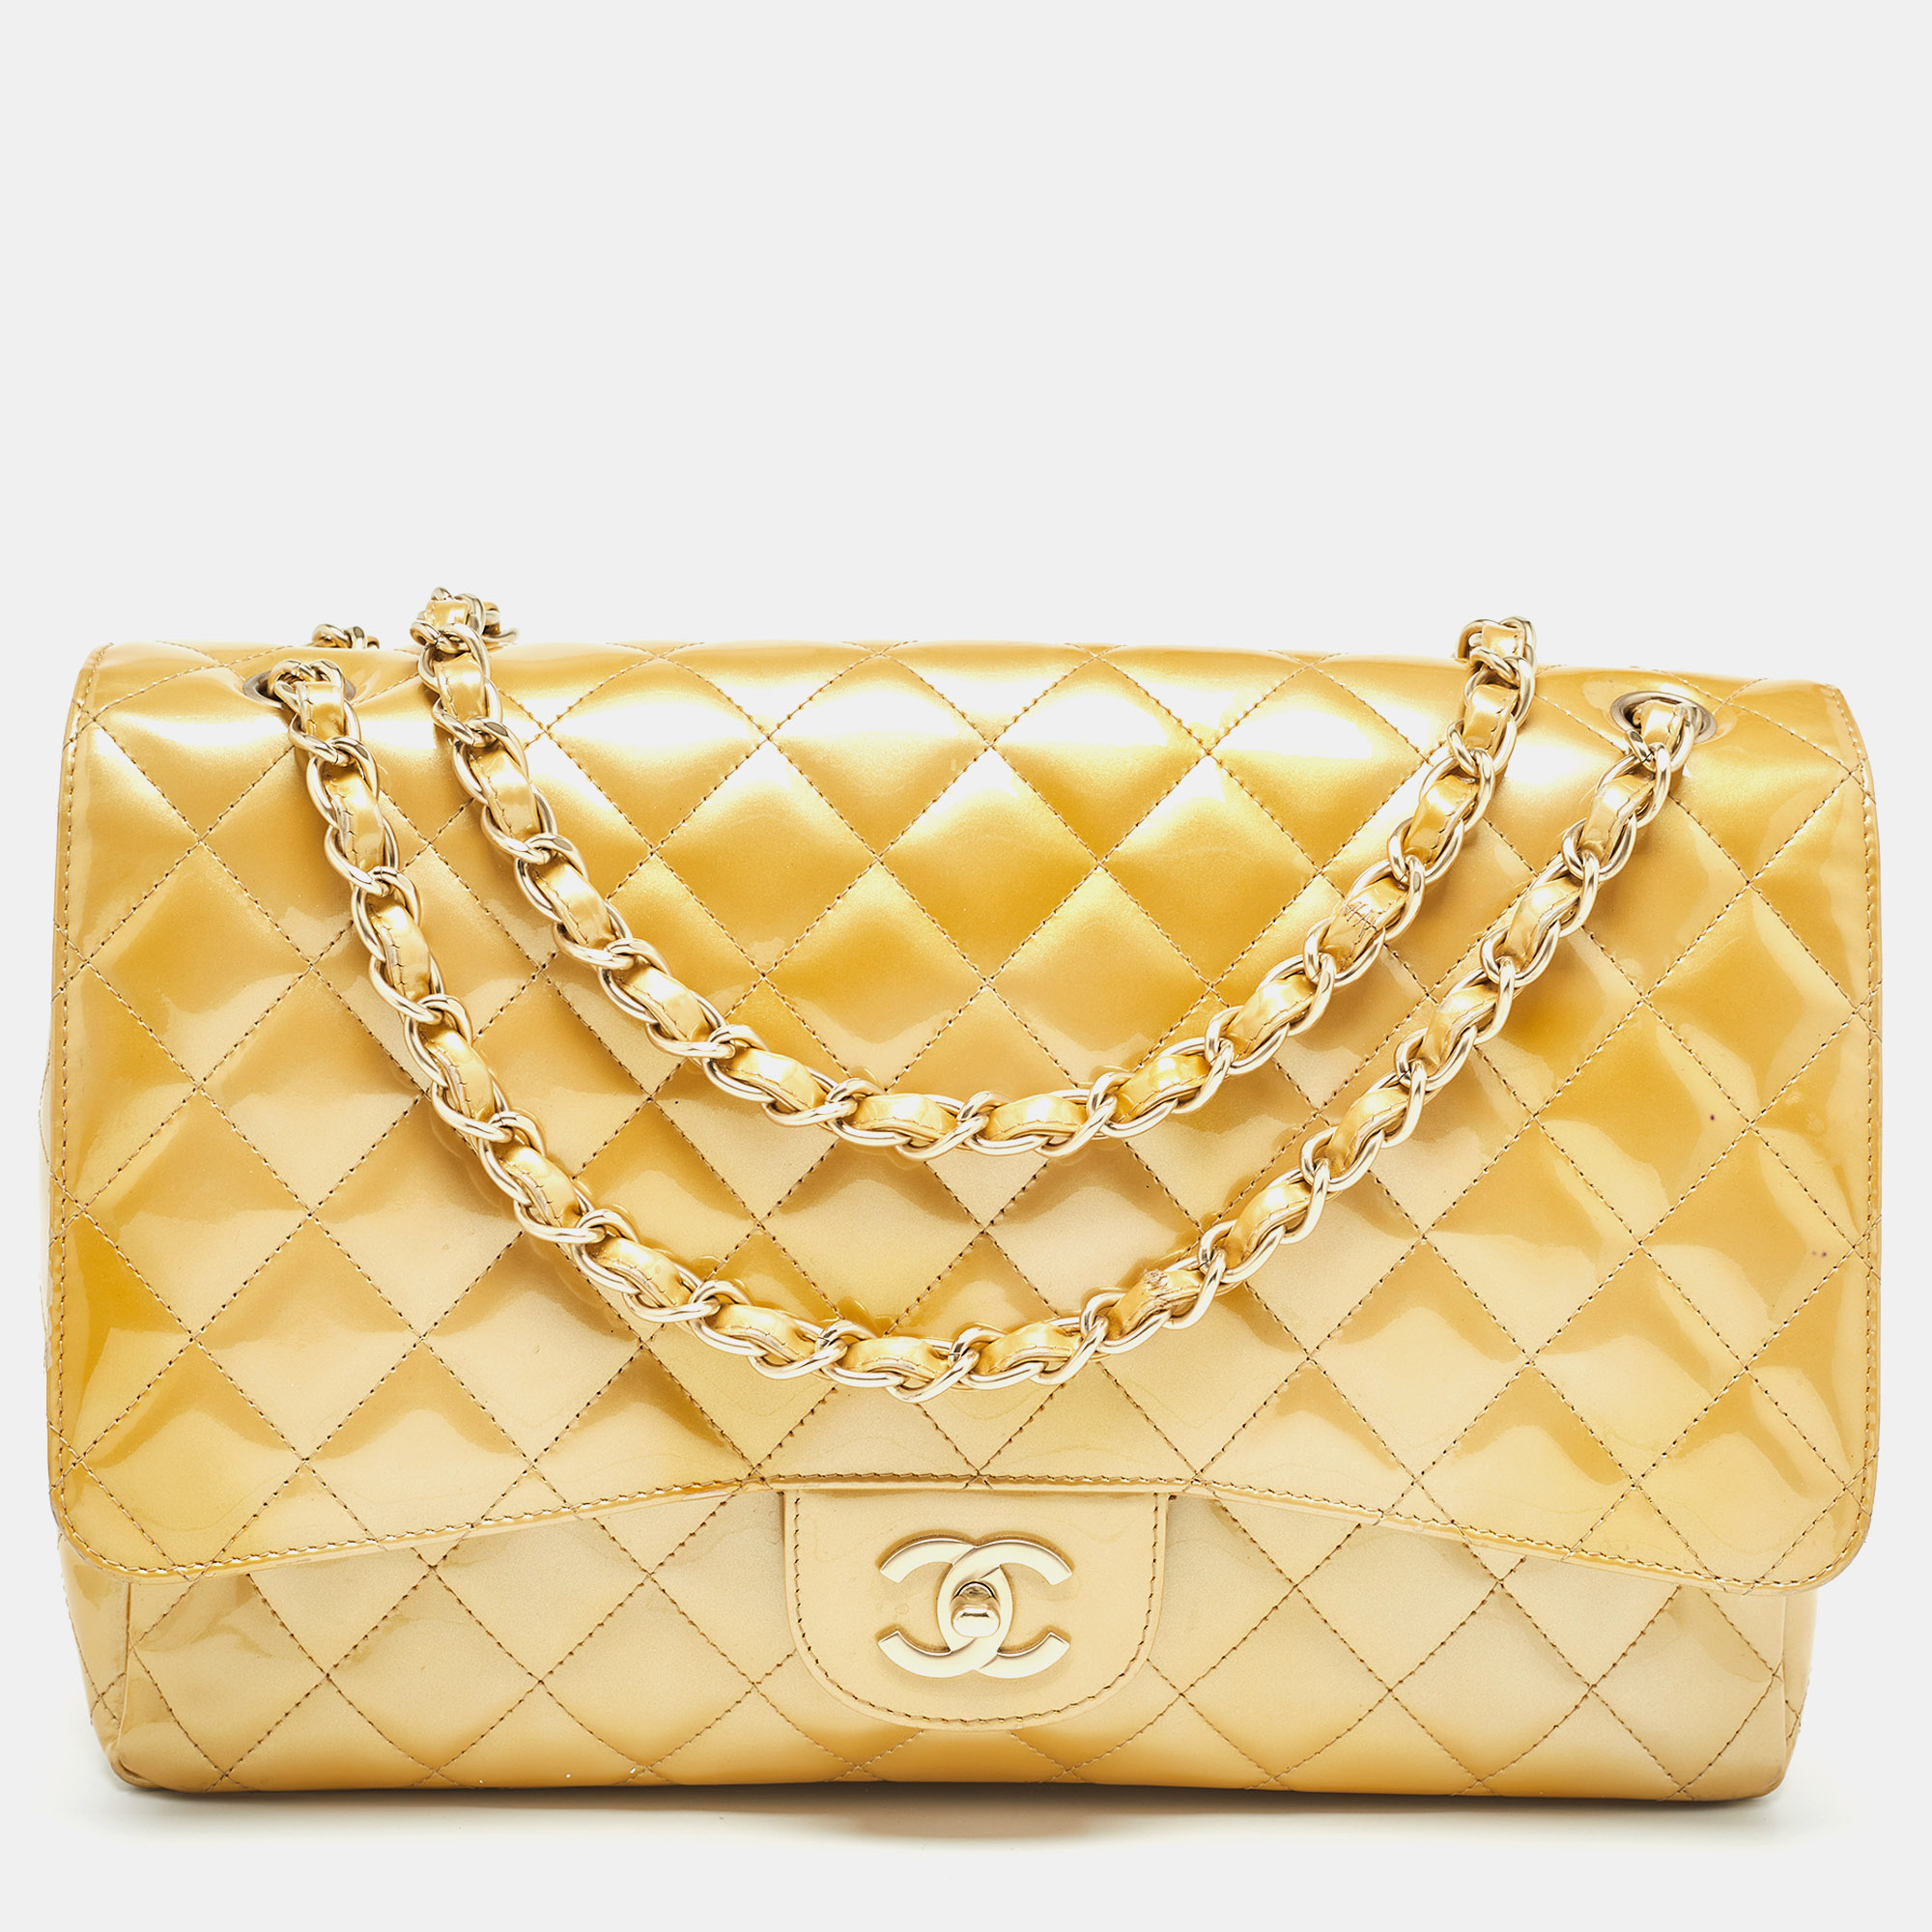 Chanel gold quilted patent leather maxi classic single flap bag